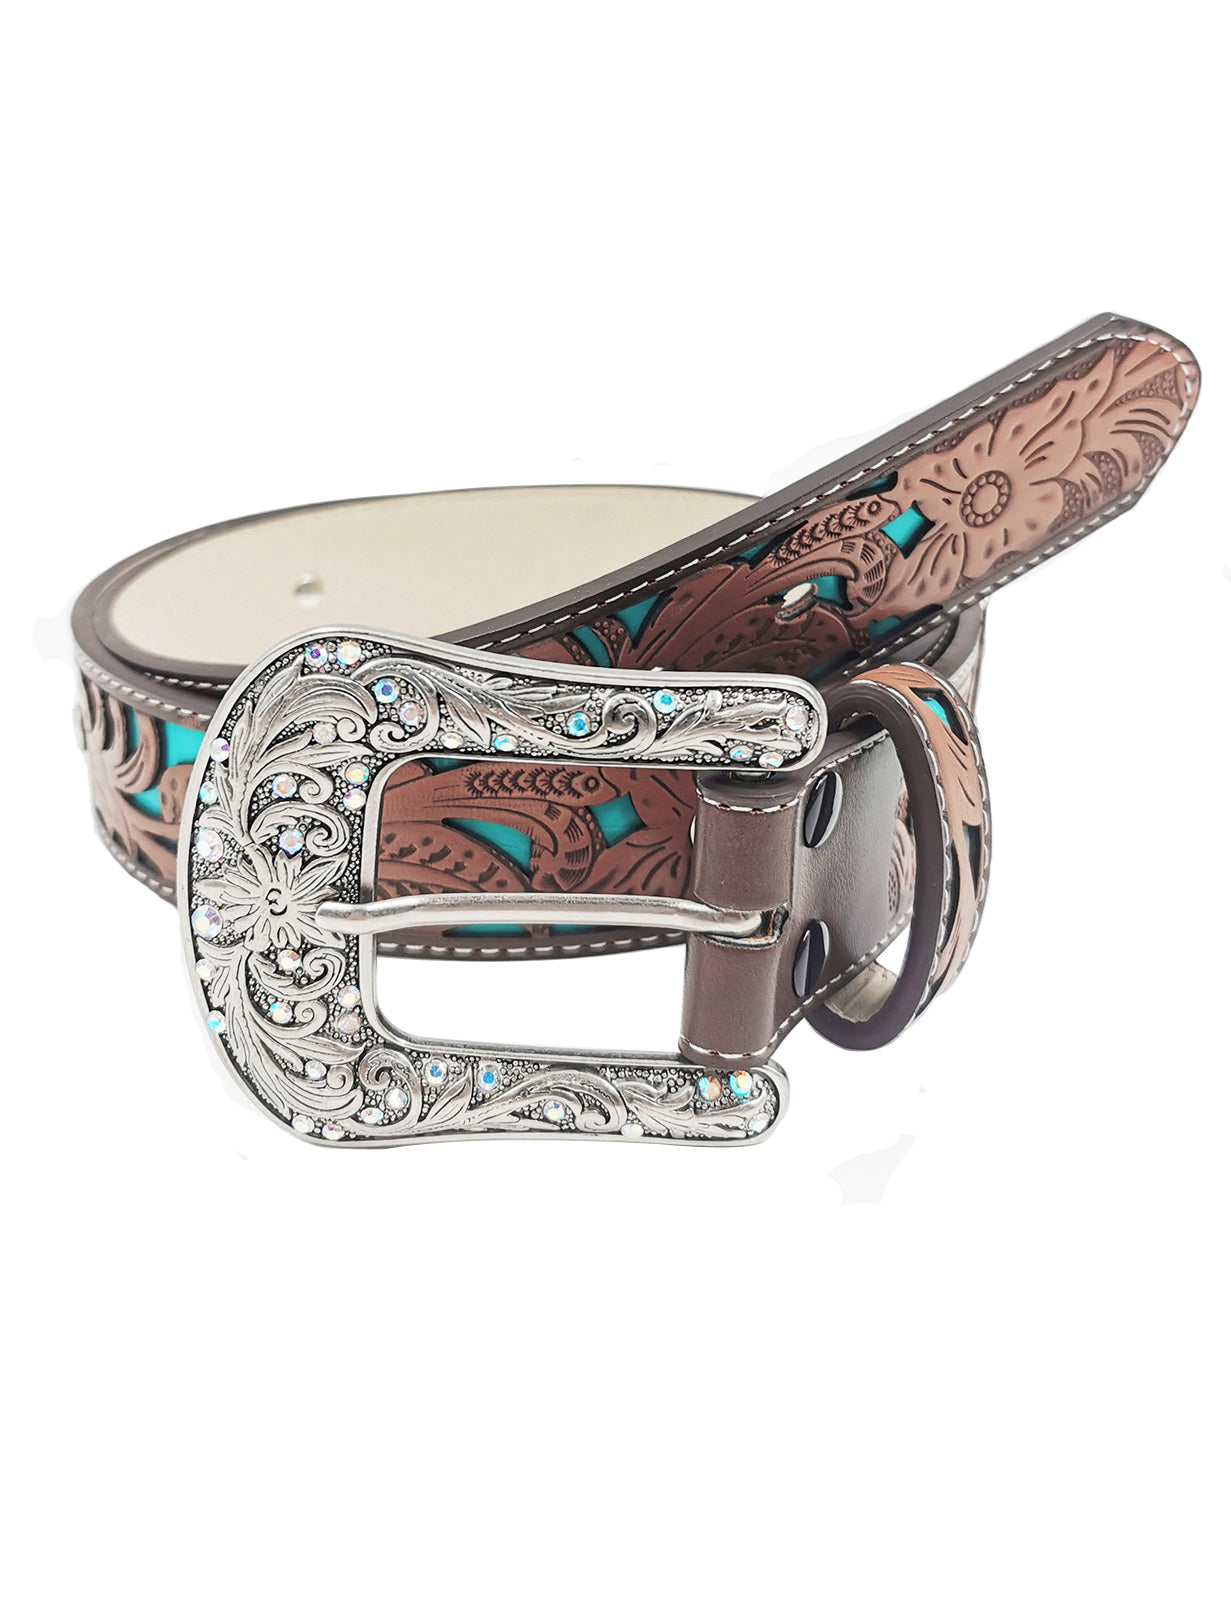 TOPACC Western Turquoise Belts - Turquoise Indians Belt Buckle Cobre/Bronce